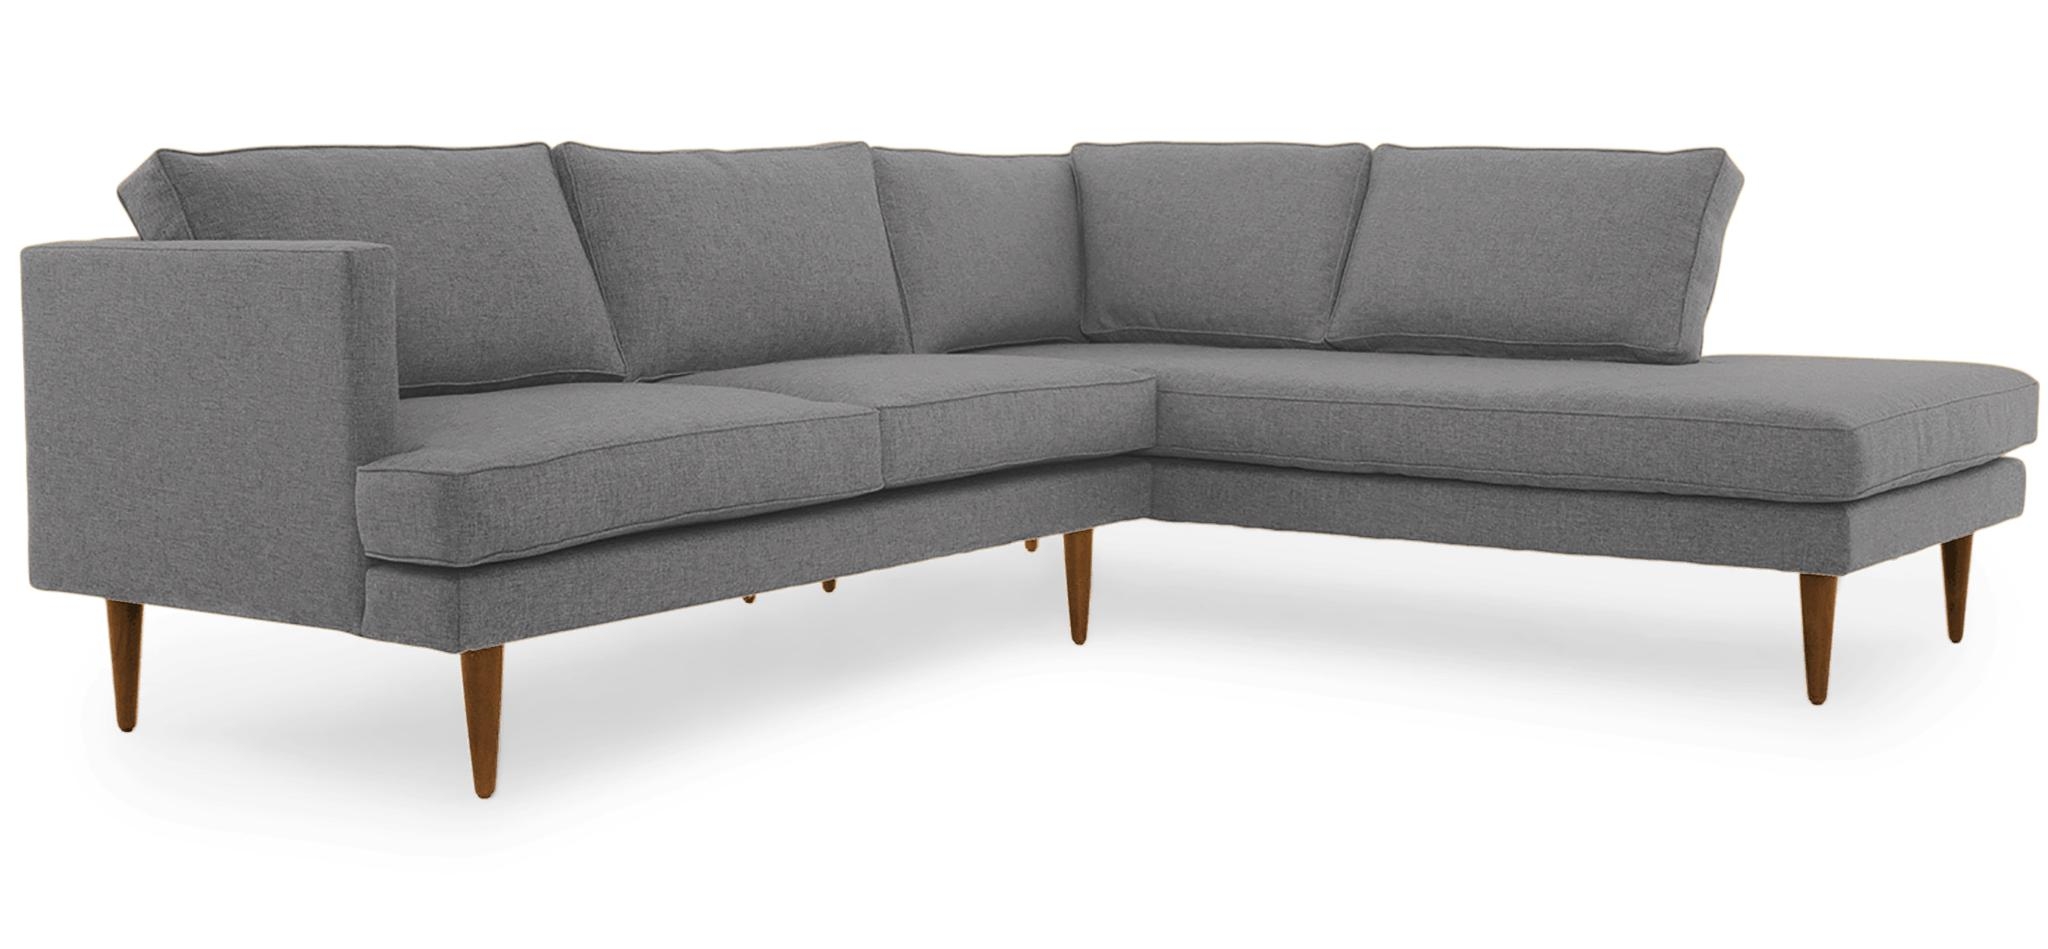 Gray Preston Mid Century Modern Sectional with Bumper (2 piece) - Royale Ash - Mocha - Right  - Image 1